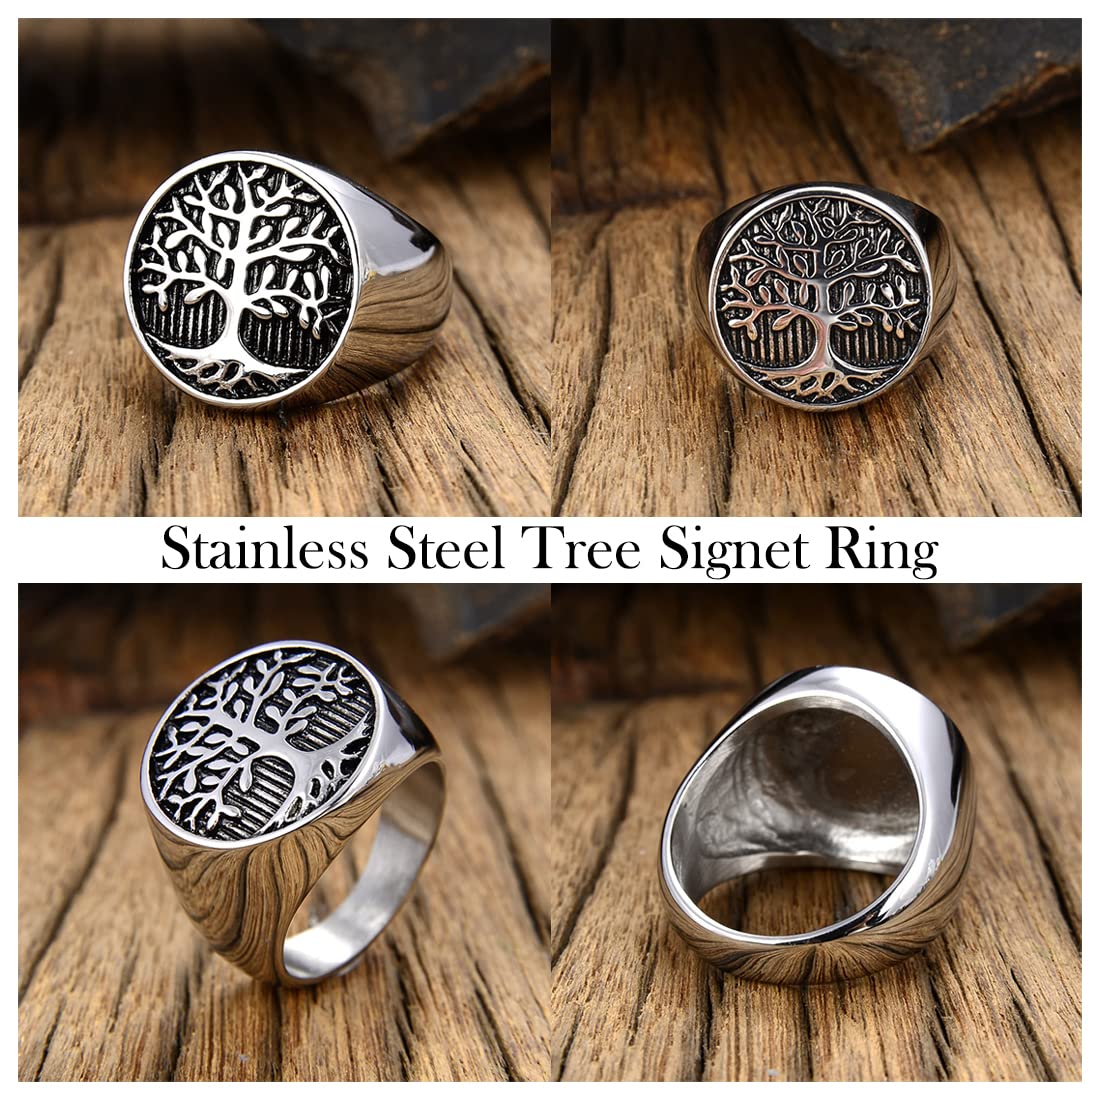 Yellow Chimes Rings for Men and Boys | Silver Rings for Men | Tree Signet Shaped Stainless Steel Rings for Men | Birthday Gift for Men and Boys Anniversary Gift for Husband